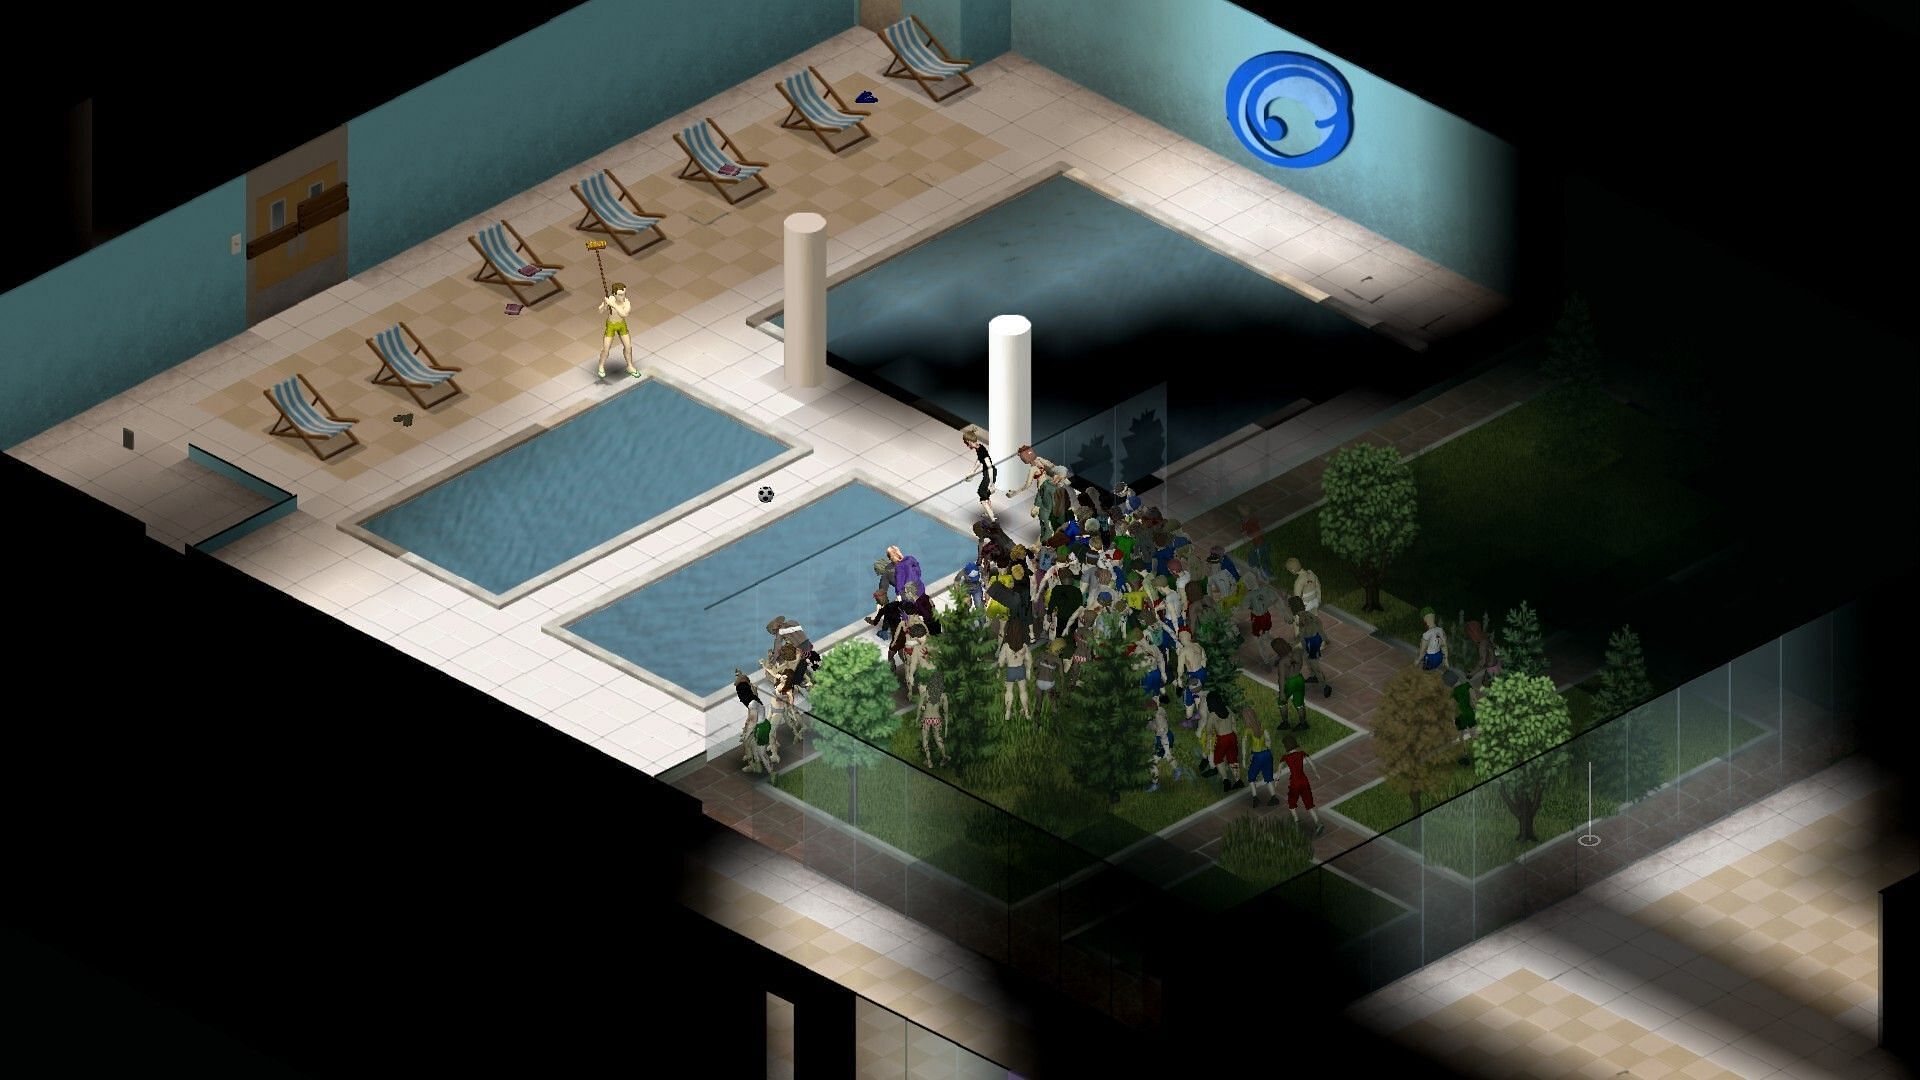 Project Zomboid is reminiscent of Minecraft zombie apocalypse mods/servers (Image via The Indie Stone)